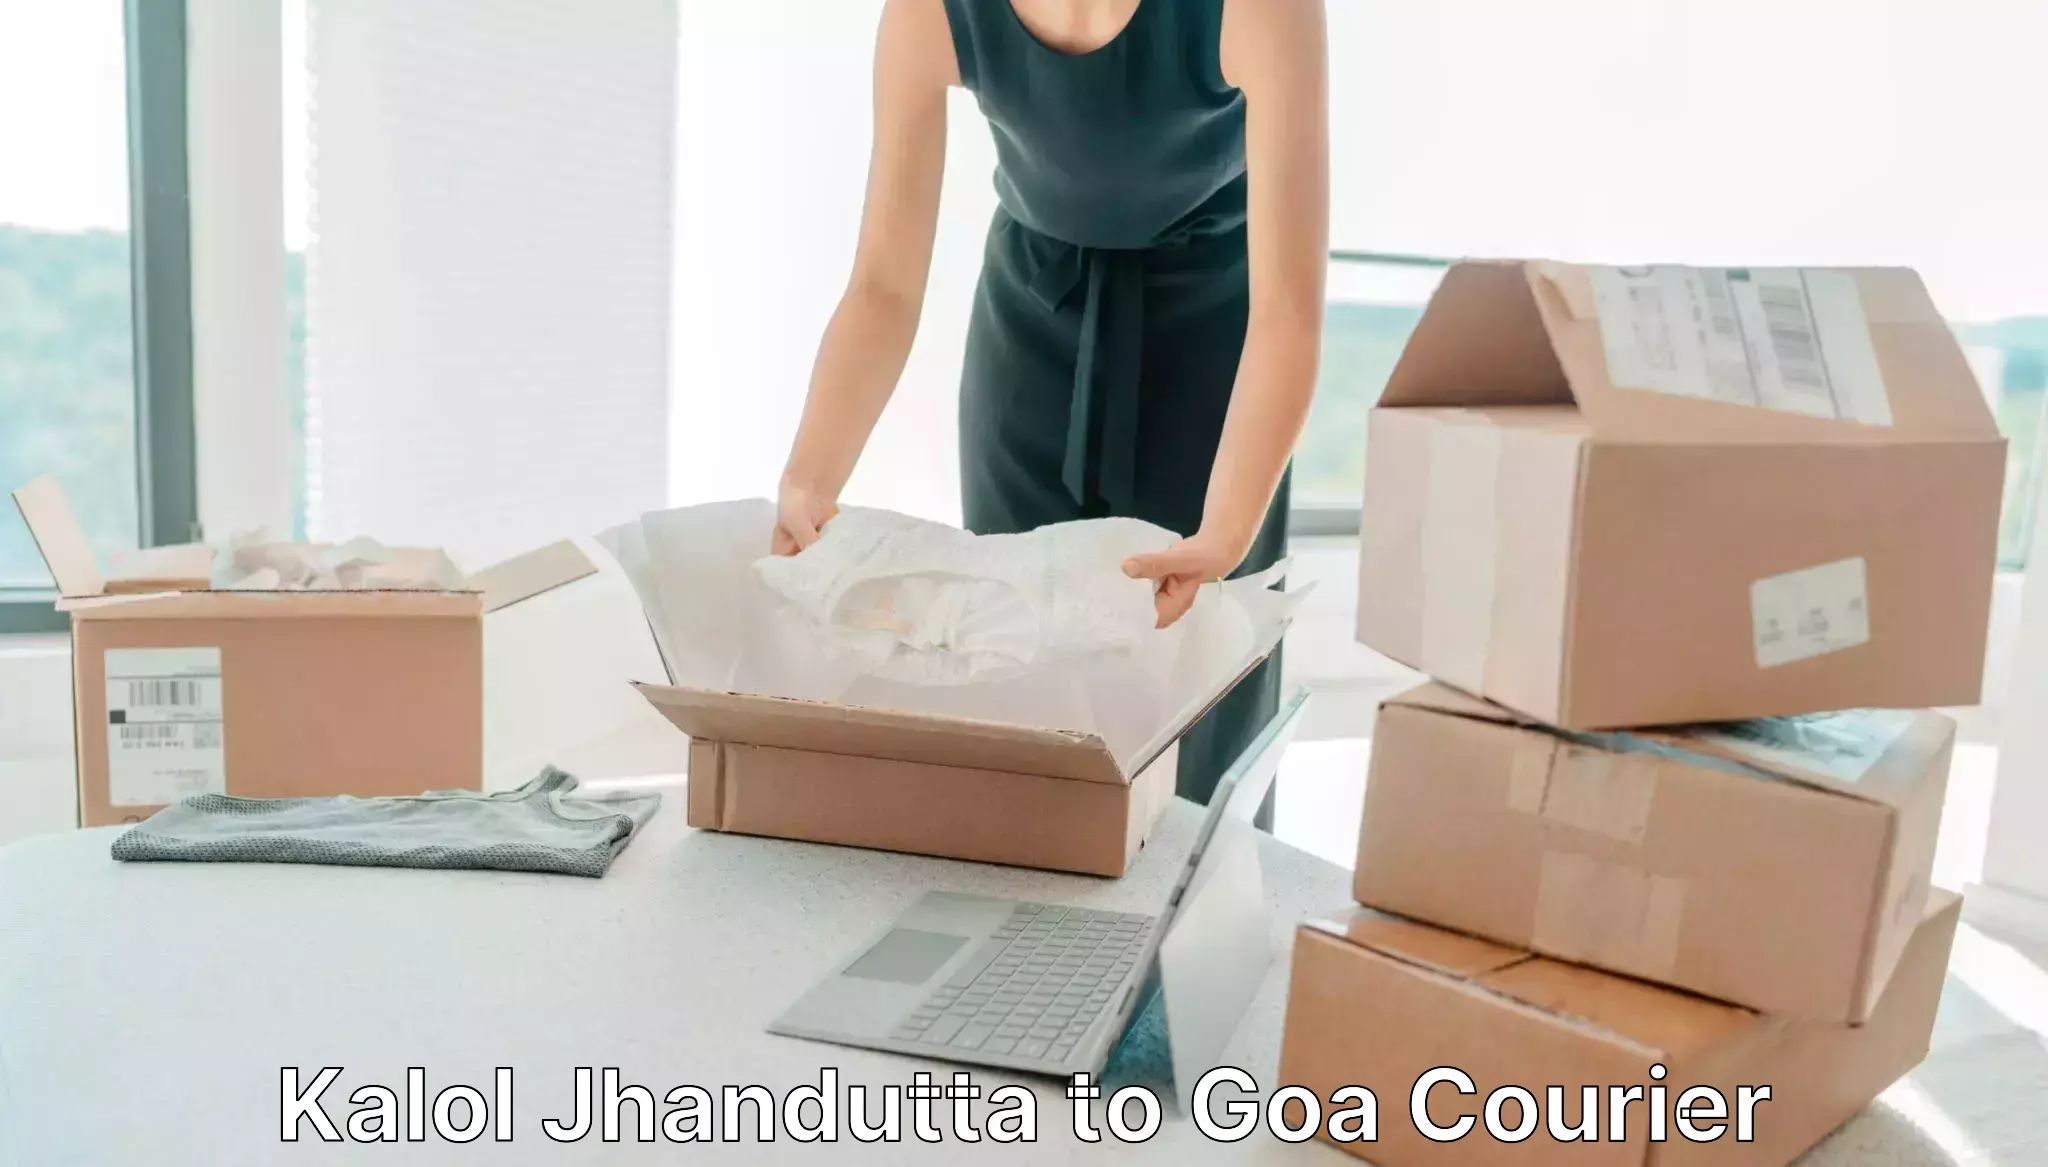 Affordable parcel service in Kalol Jhandutta to Margao